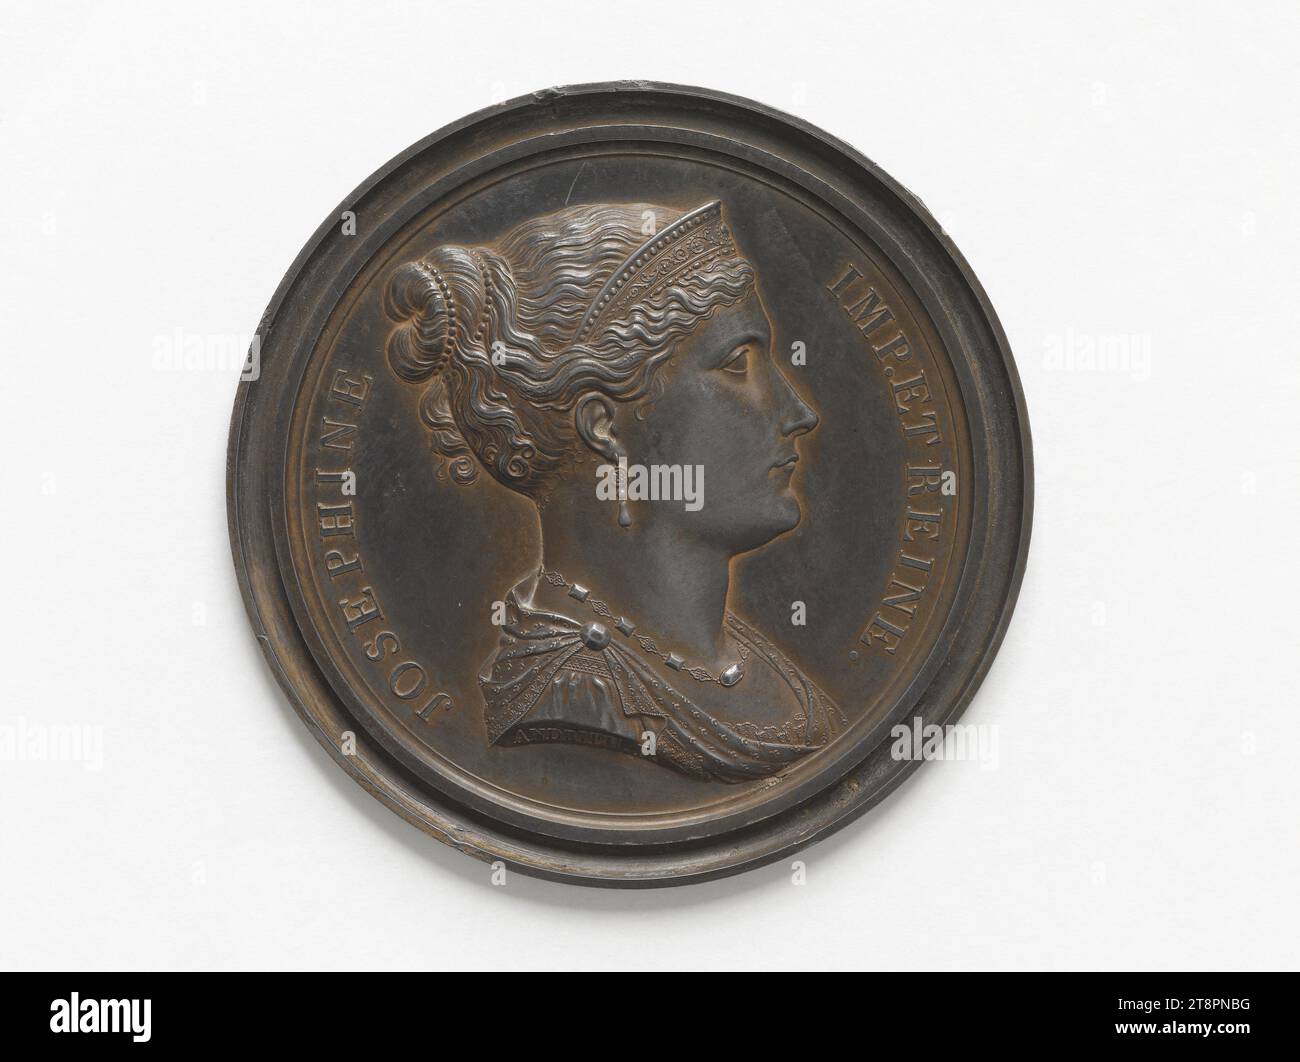 Joséphine de Beauharnais (1763-1814), Empress of the French (1804-1810), 1807, Andrieu, Bertrand or Jean-Bertrand, Medal Engraver, In 1807, Numismatic, Medal, Paris, Dimensions - Work: Diameter: 6.8 cm, Weight (type dimension): 68.36 g Stock Photo